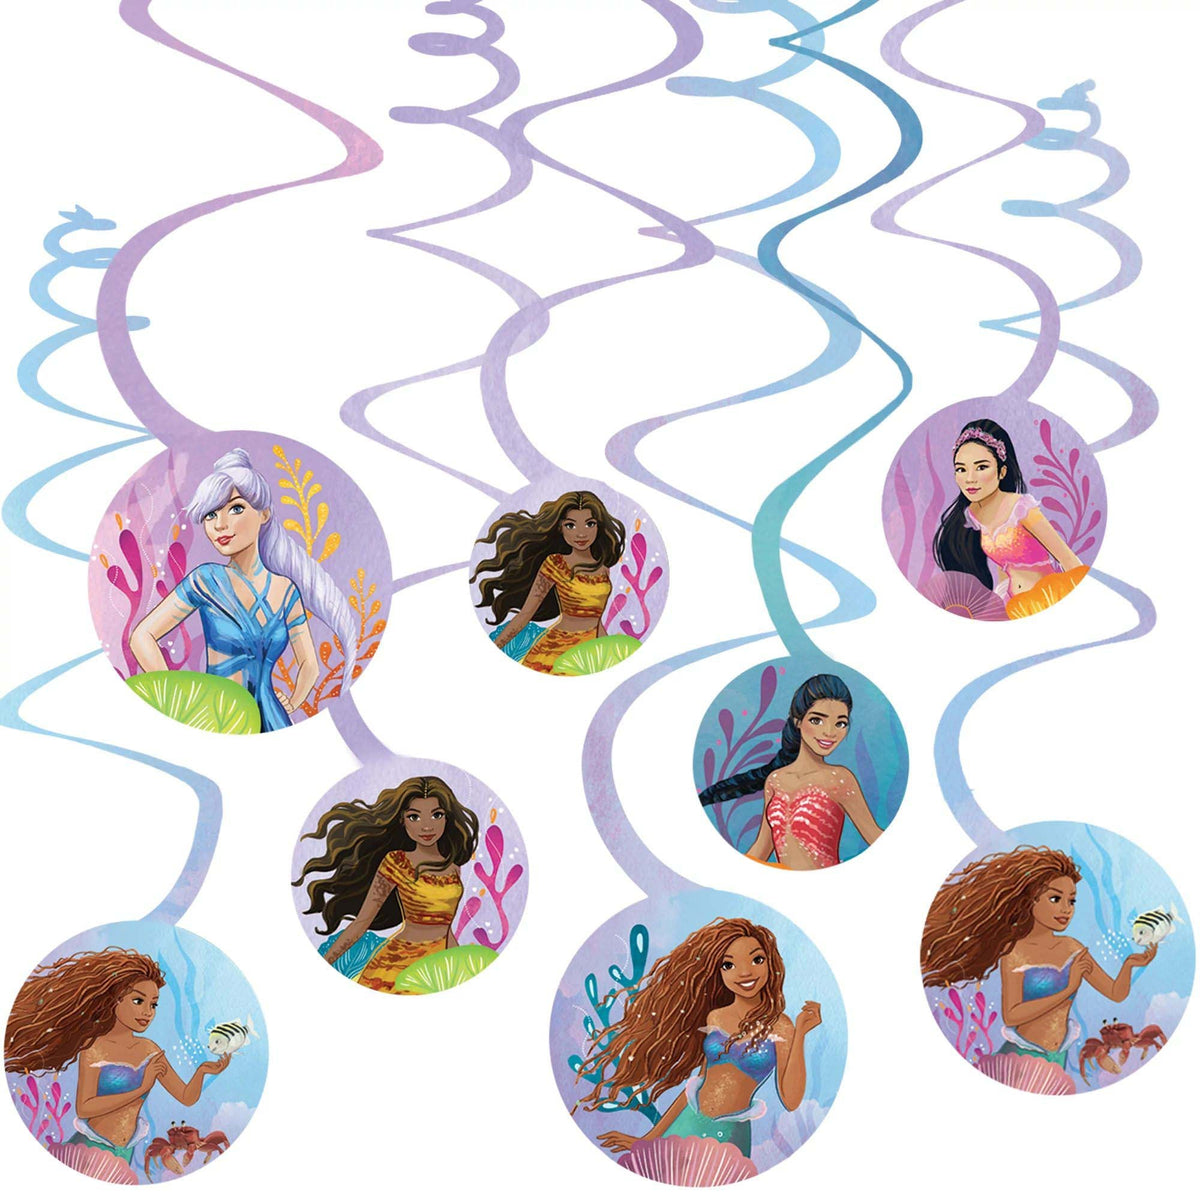 AMSCAN CA Kids Birthday The Little Mermaid Birthday Spiral Decoration Kit with Cutouts, 12 Count 192937382134